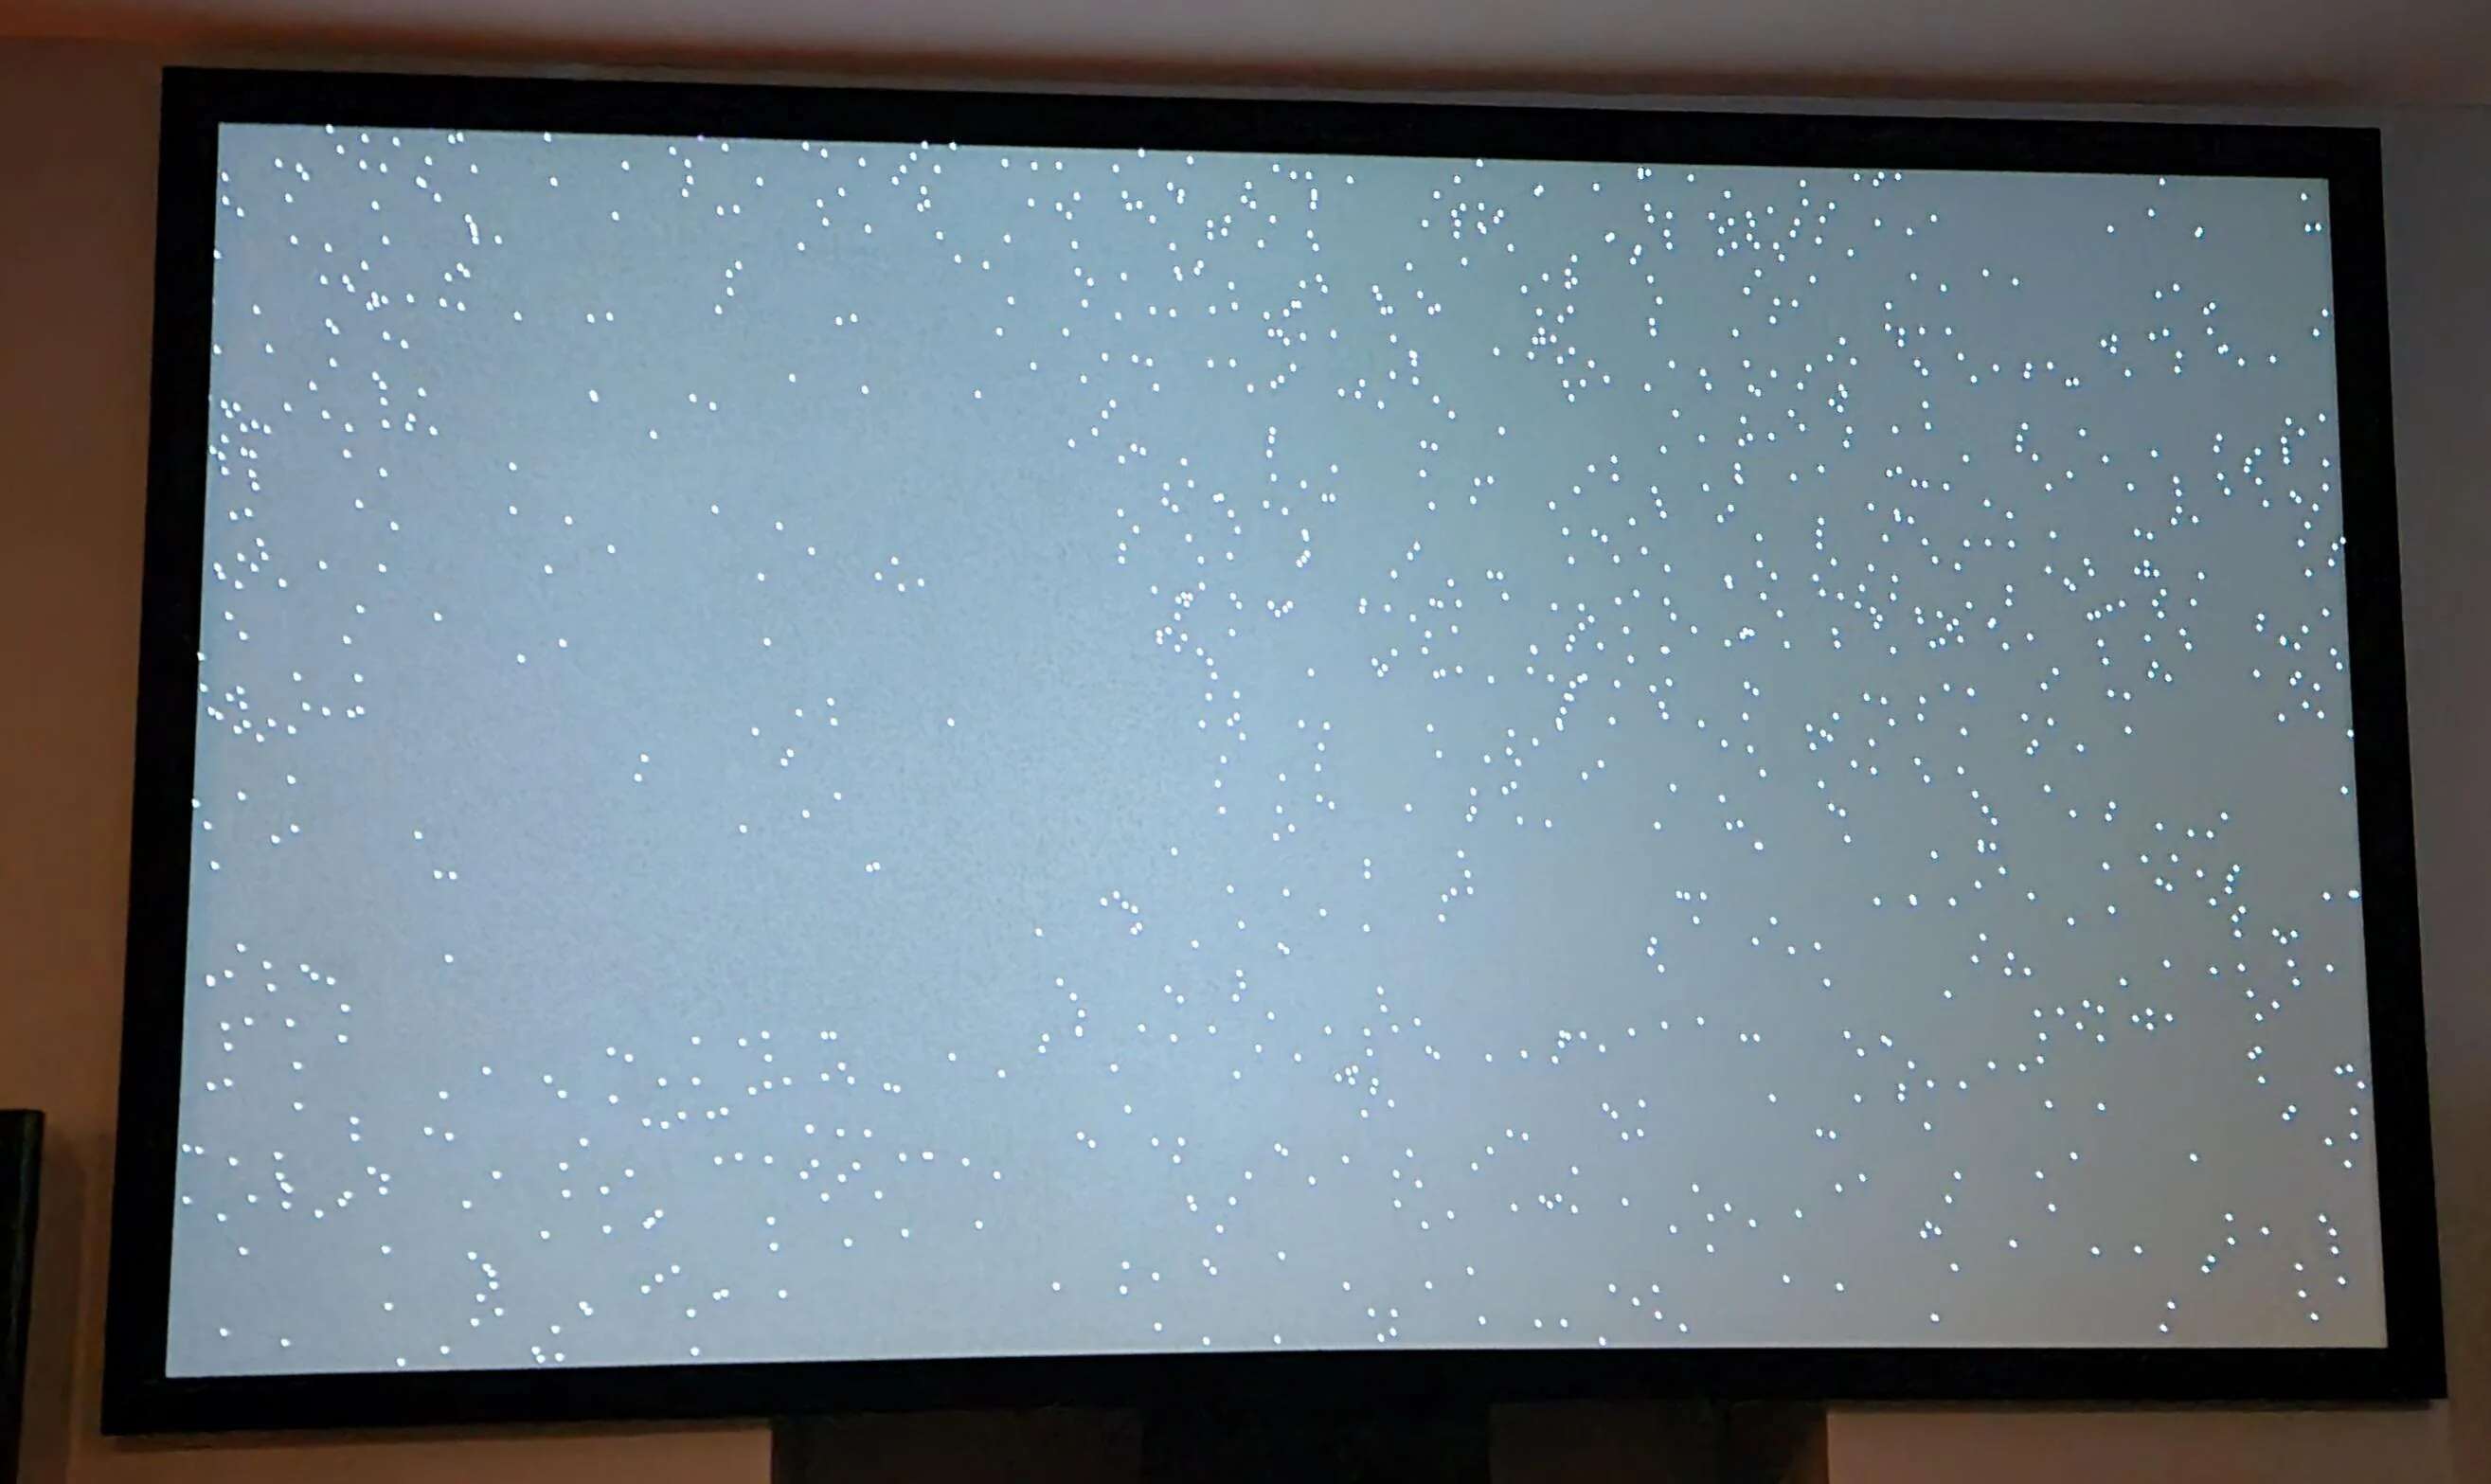 How To Fix White Dots On Projector Screen